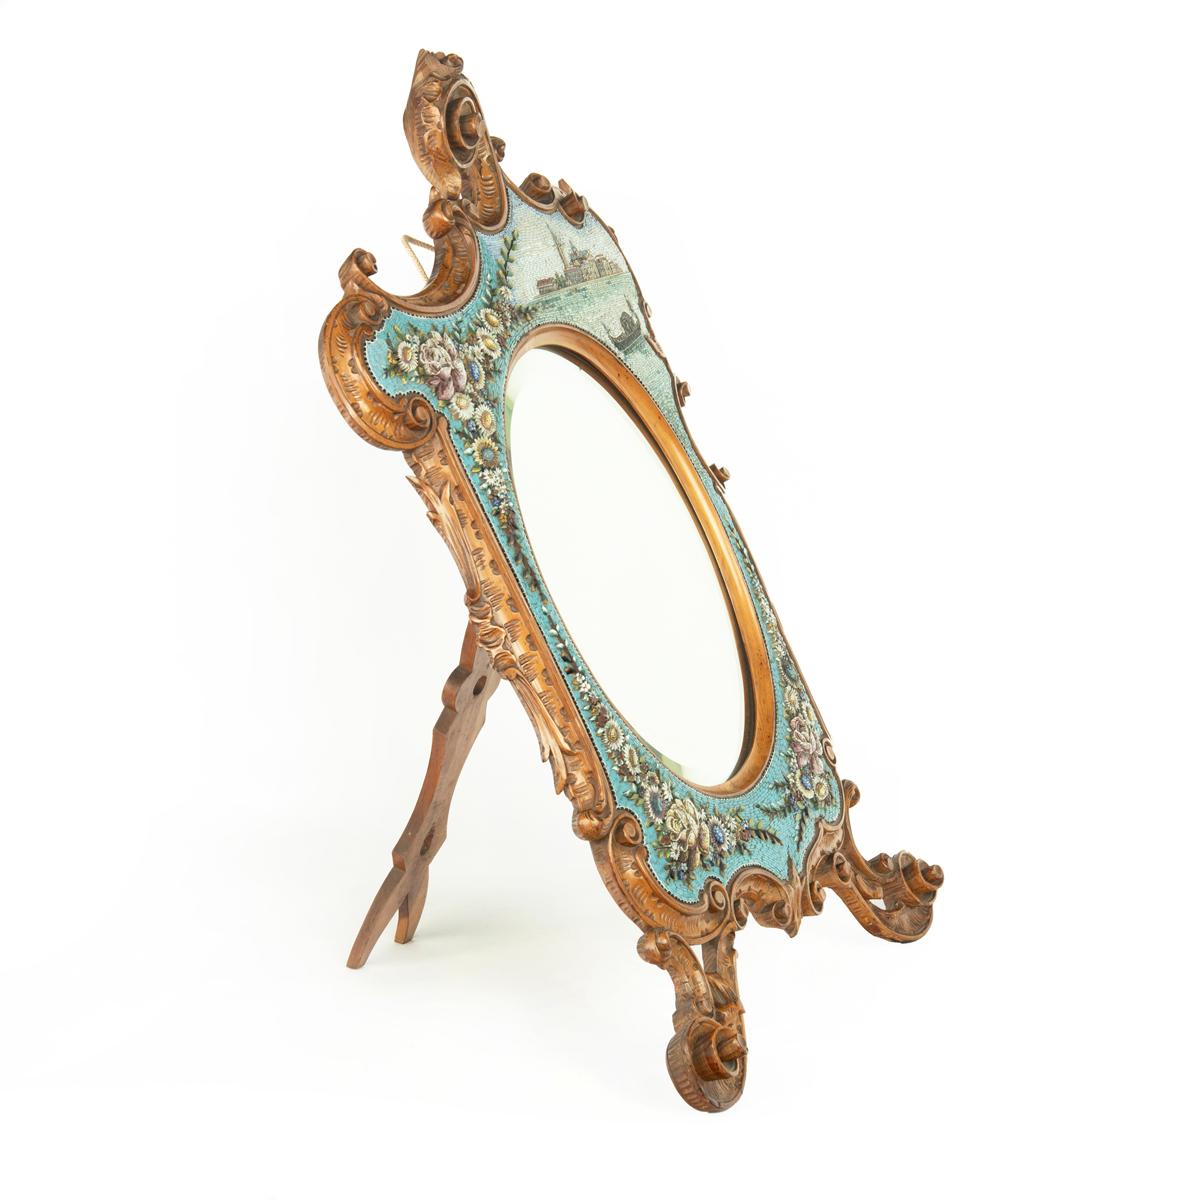 A delicate walnut easel dressing table mirror, the oval plate within an asymetrical frame of C-scrolls in the Rococco manner, .deocorated in glass mosaic with a Venetian scene and floral sprays. Italian, circa 1900.